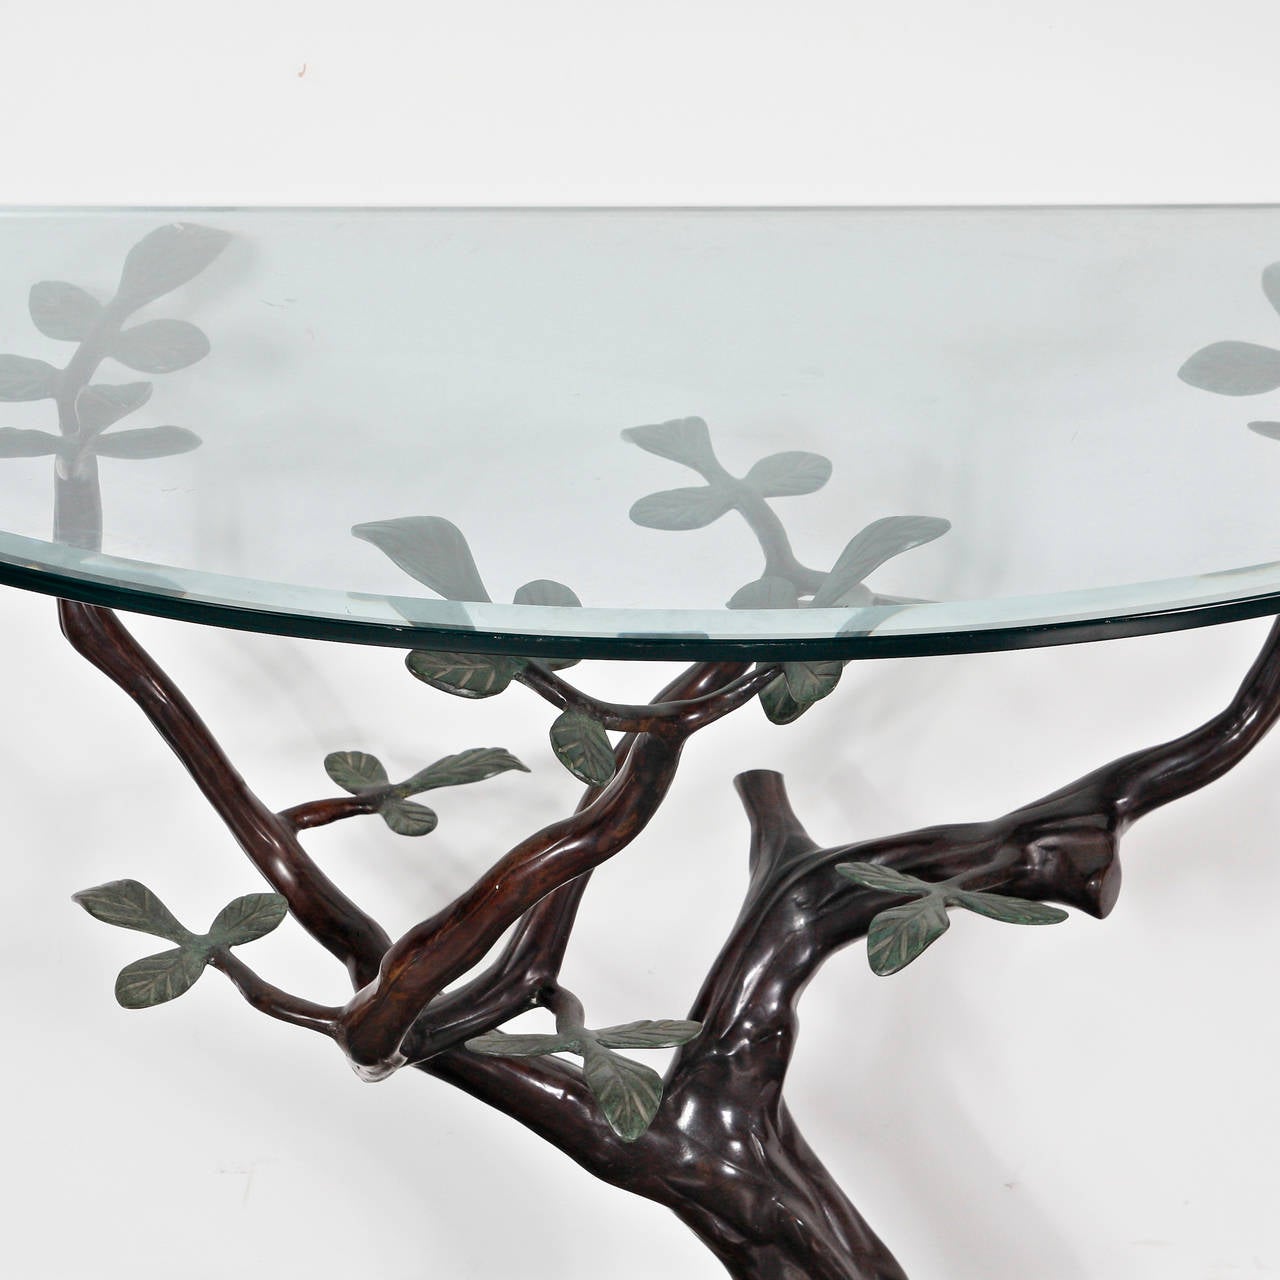 Unique sculptural Bonsai console table, manufactured in Belgium, circa 1970.

This rare find is made of high quality bronze in the shape of a Bonsai tree. Crafted with a fine eye for detail creating the true feel of trunk, roots and nerves, in a